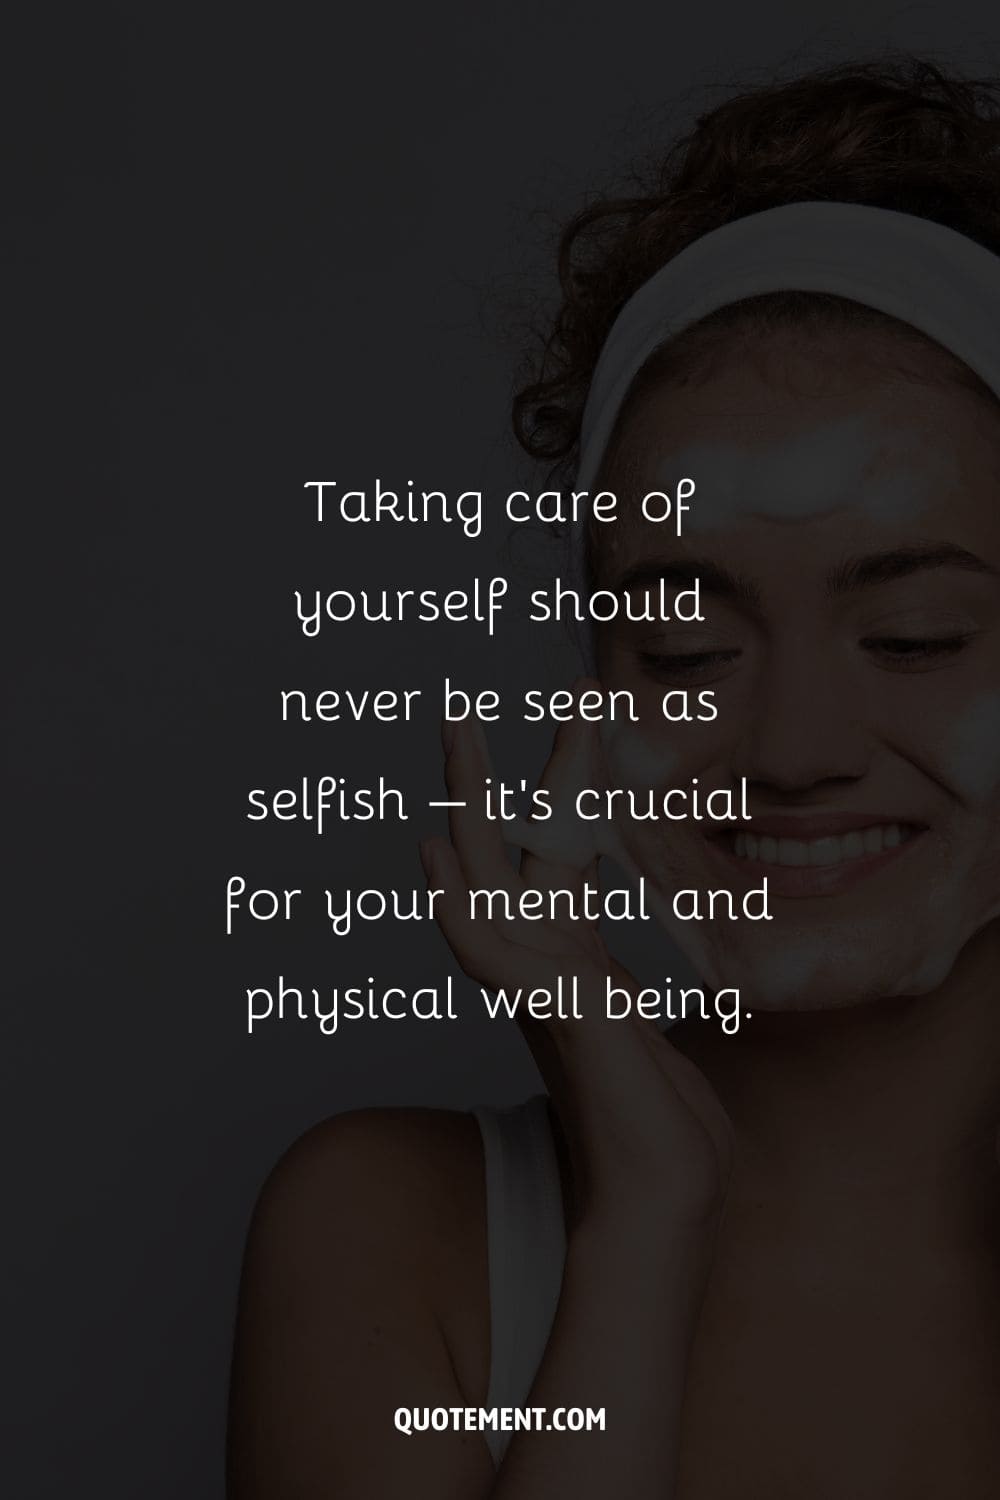 Taking care of yourself should never be seen as selfish – it’s crucial for your mental and physical well being.